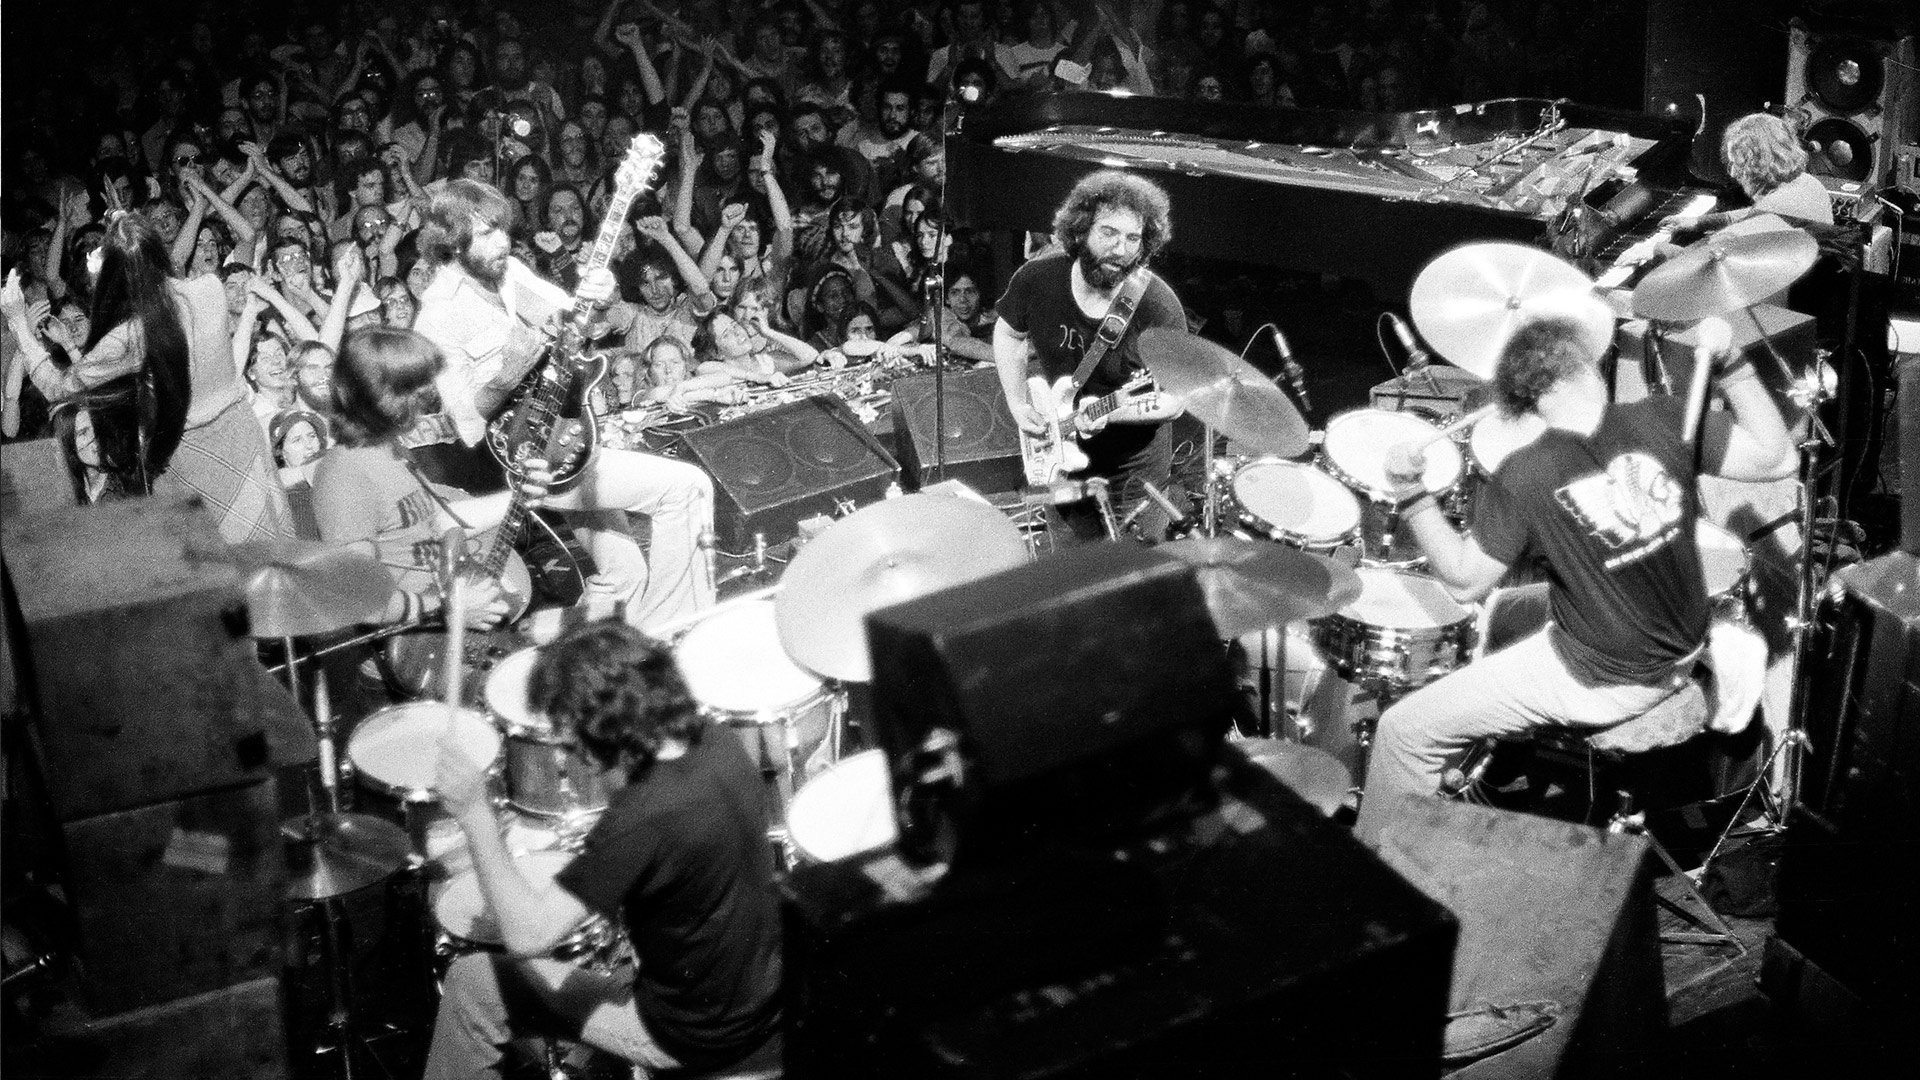 Grateful Dead: The show at Cornell University’s Barton Hall in Ithaca, New York, A legendary moment in the band’s history. 1920x1080 Full HD Wallpaper.